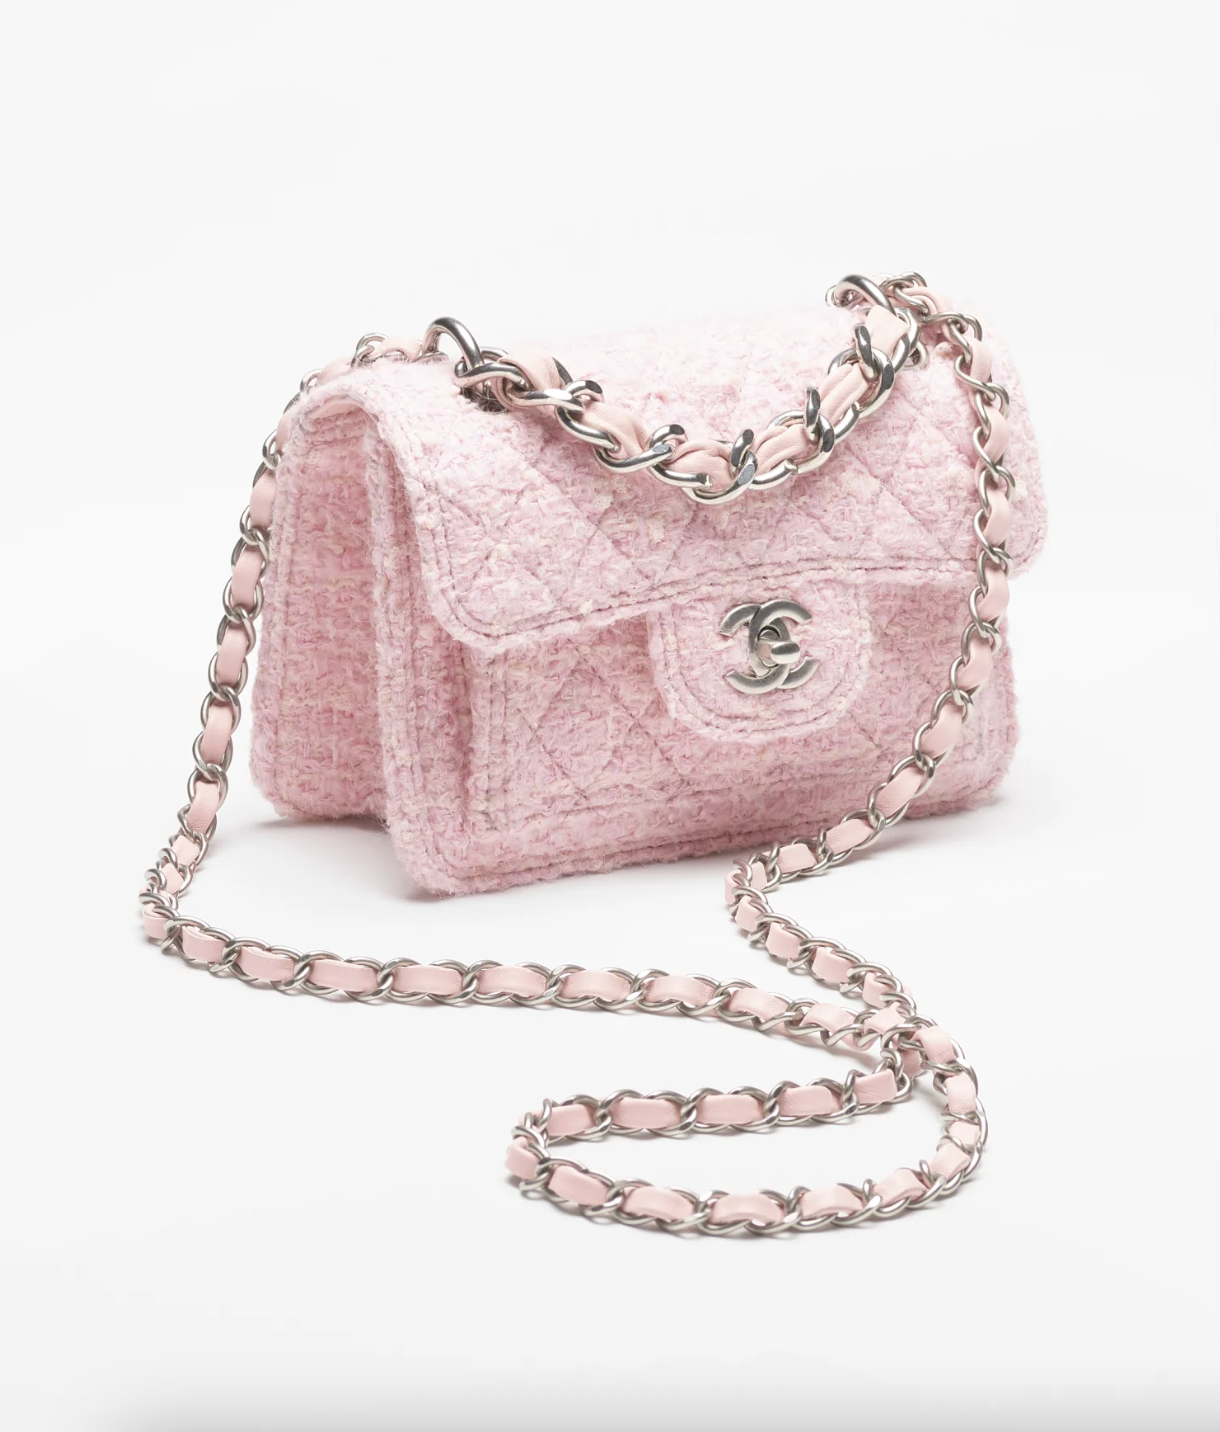 Timeless Chanel light pink mini classic flap bag Leather ref